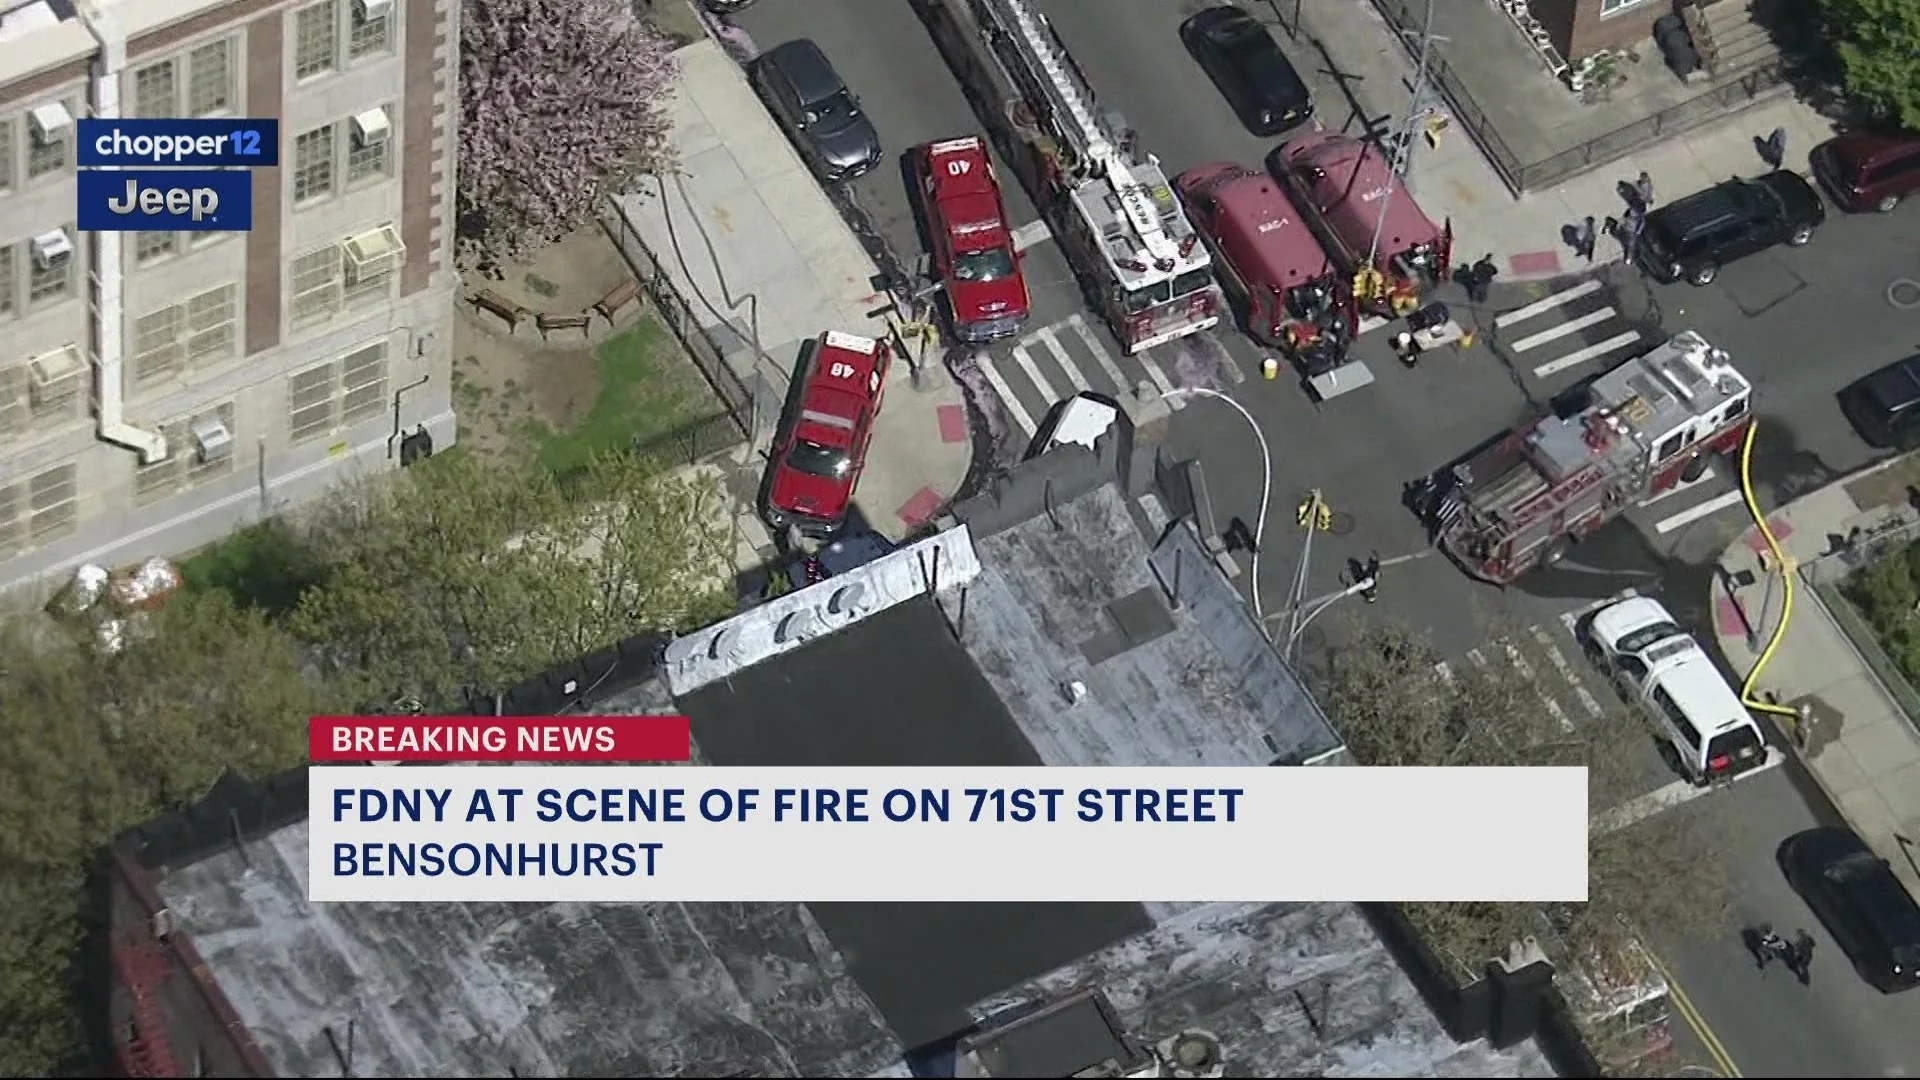 FDNY: More than 150 firefighters, EMS personnel tackle Bensonhurst home fire